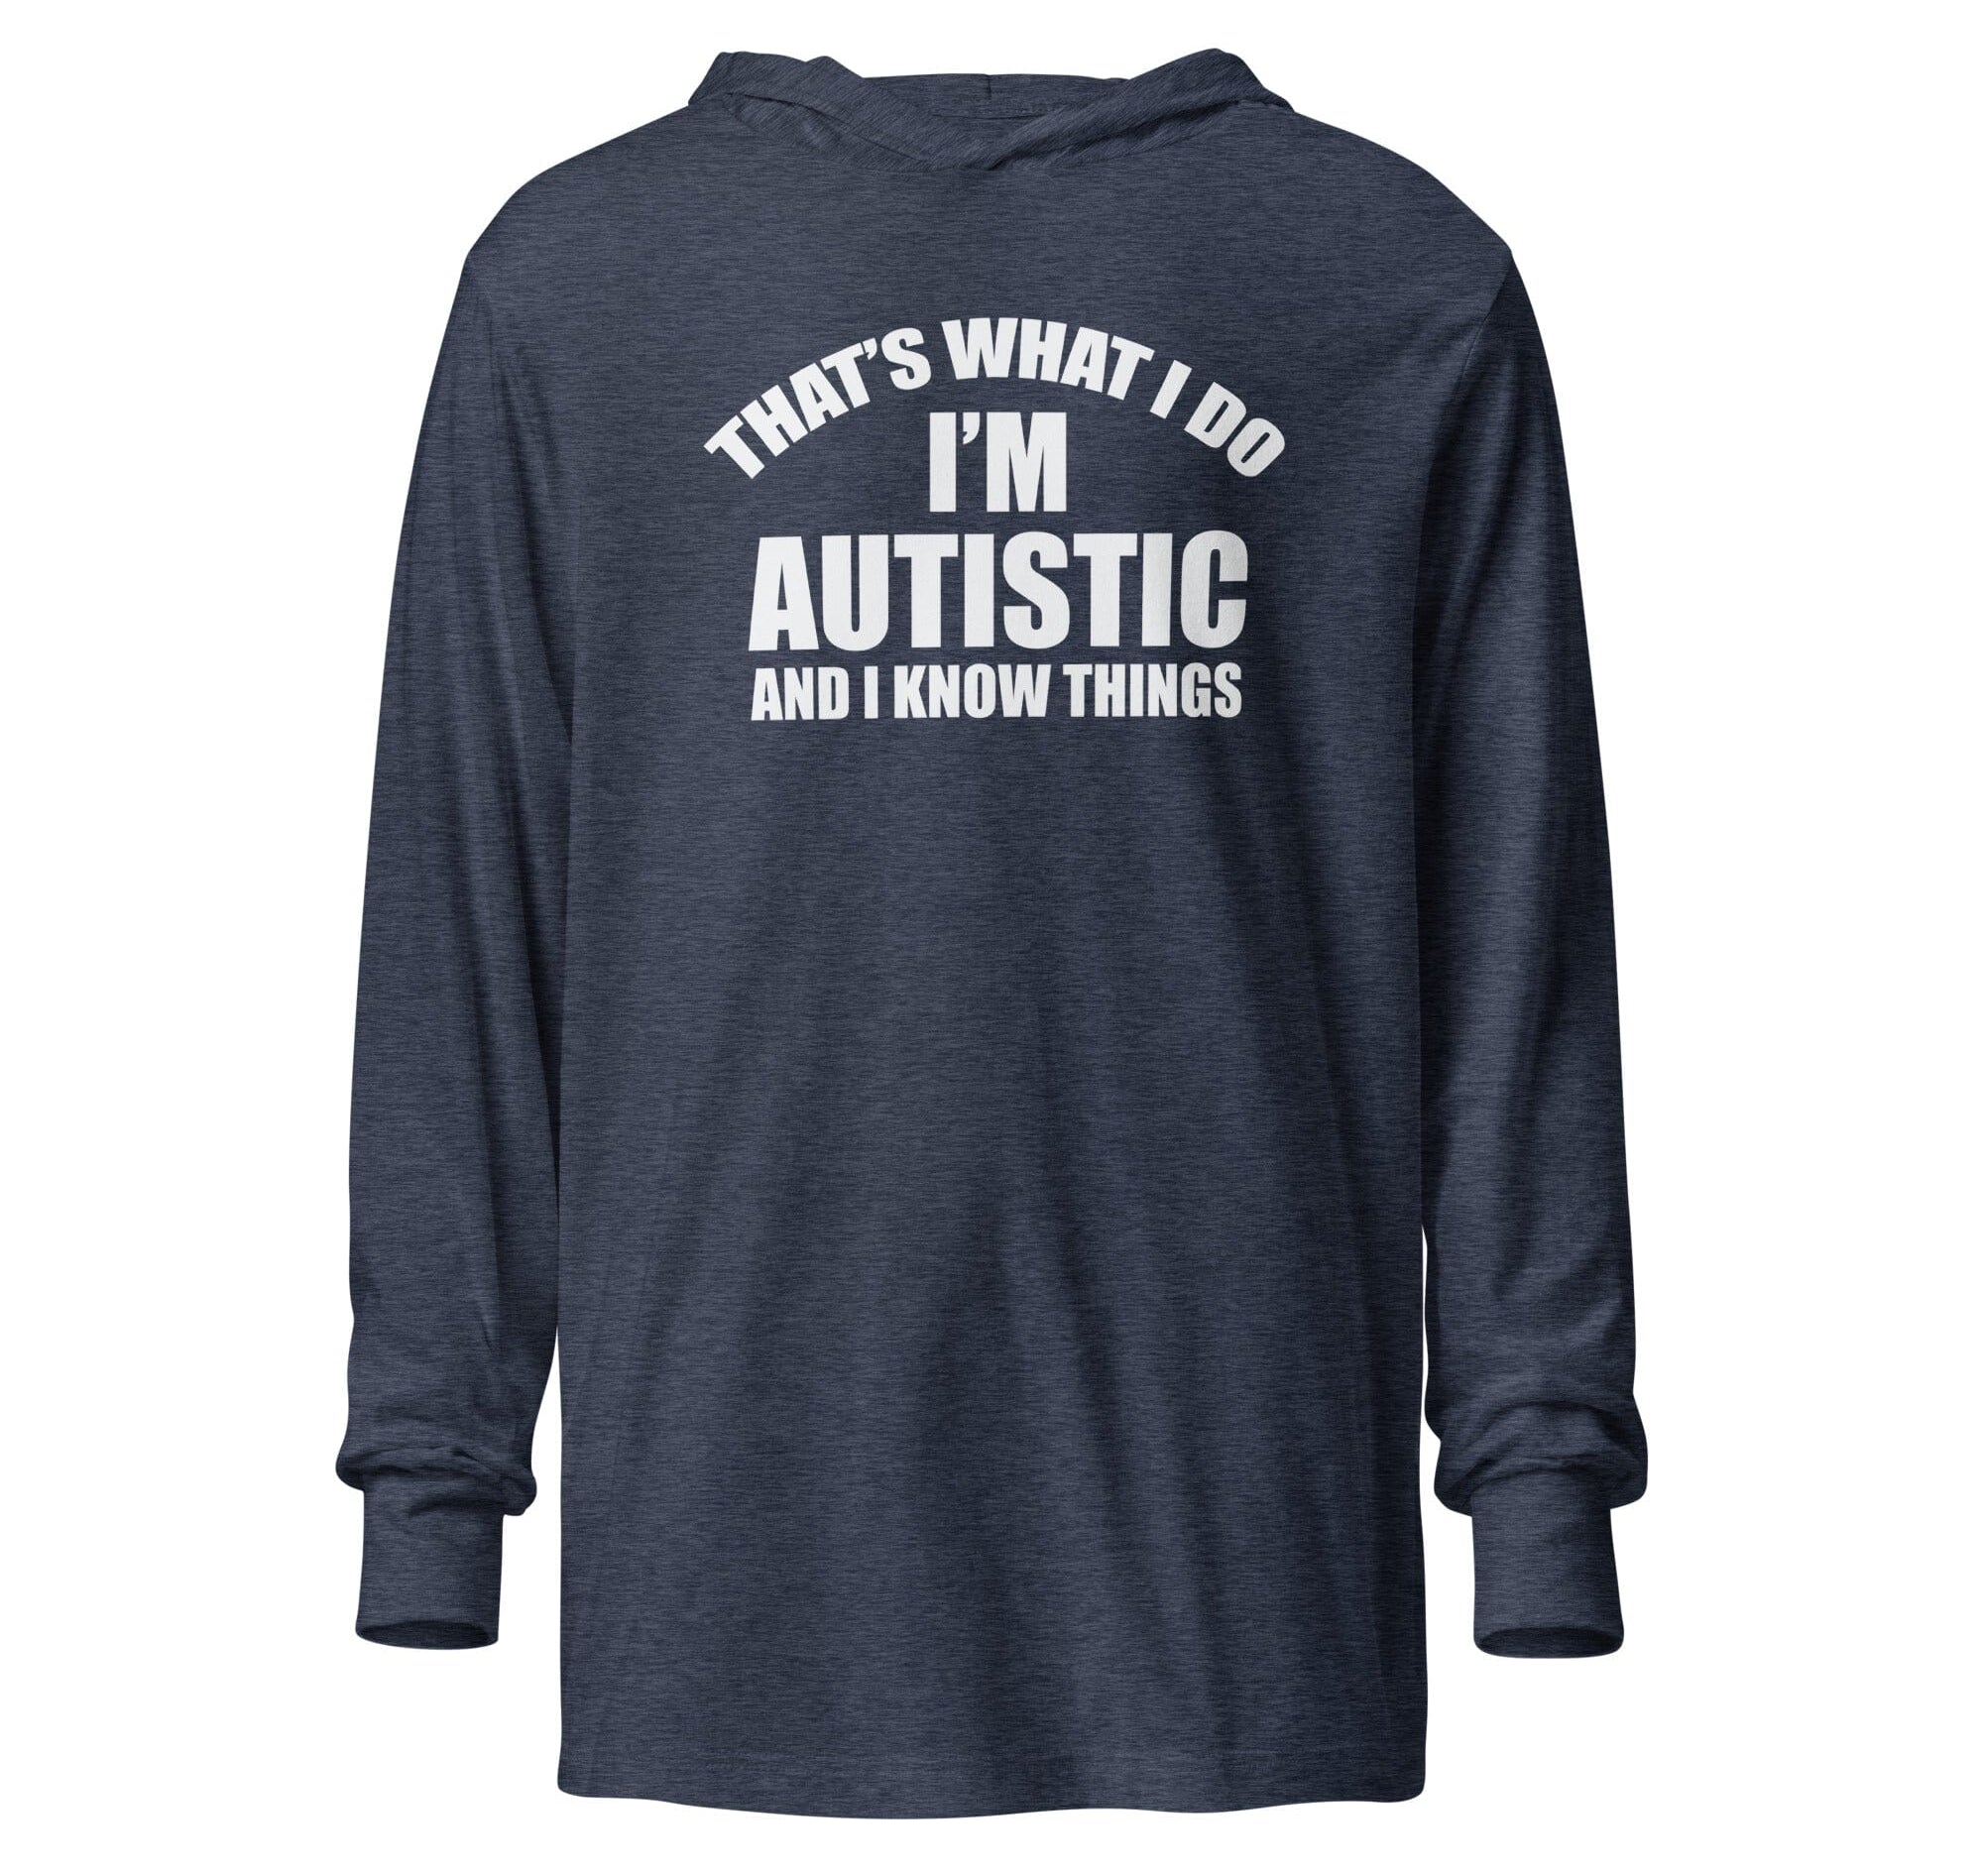 That's What I Do, I'm Autistic and I Know Things Unisex Hooded long-sleeve tee The Autistic Innovator Heather Navy XS 